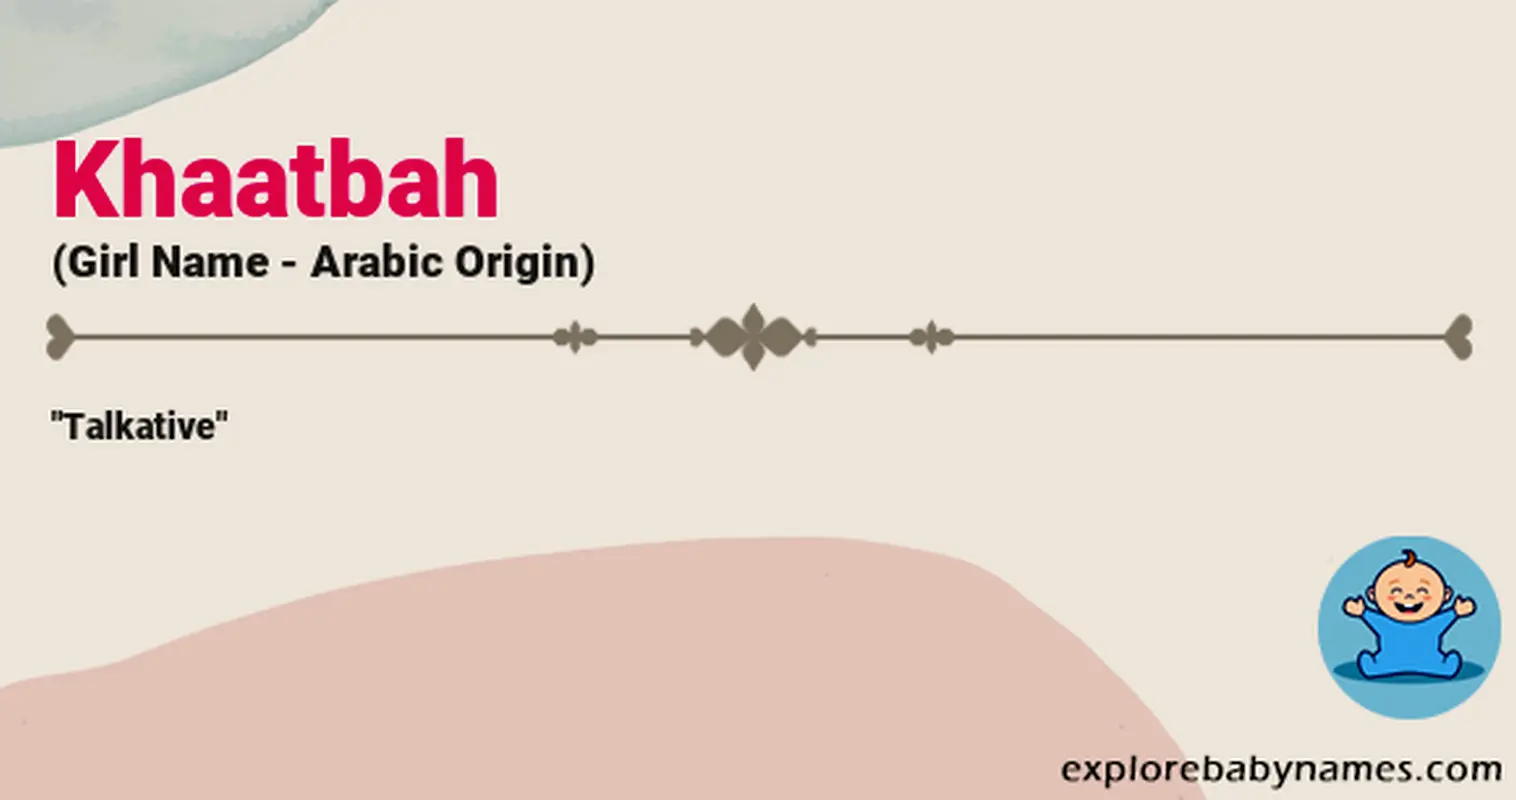 Meaning of Khaatbah